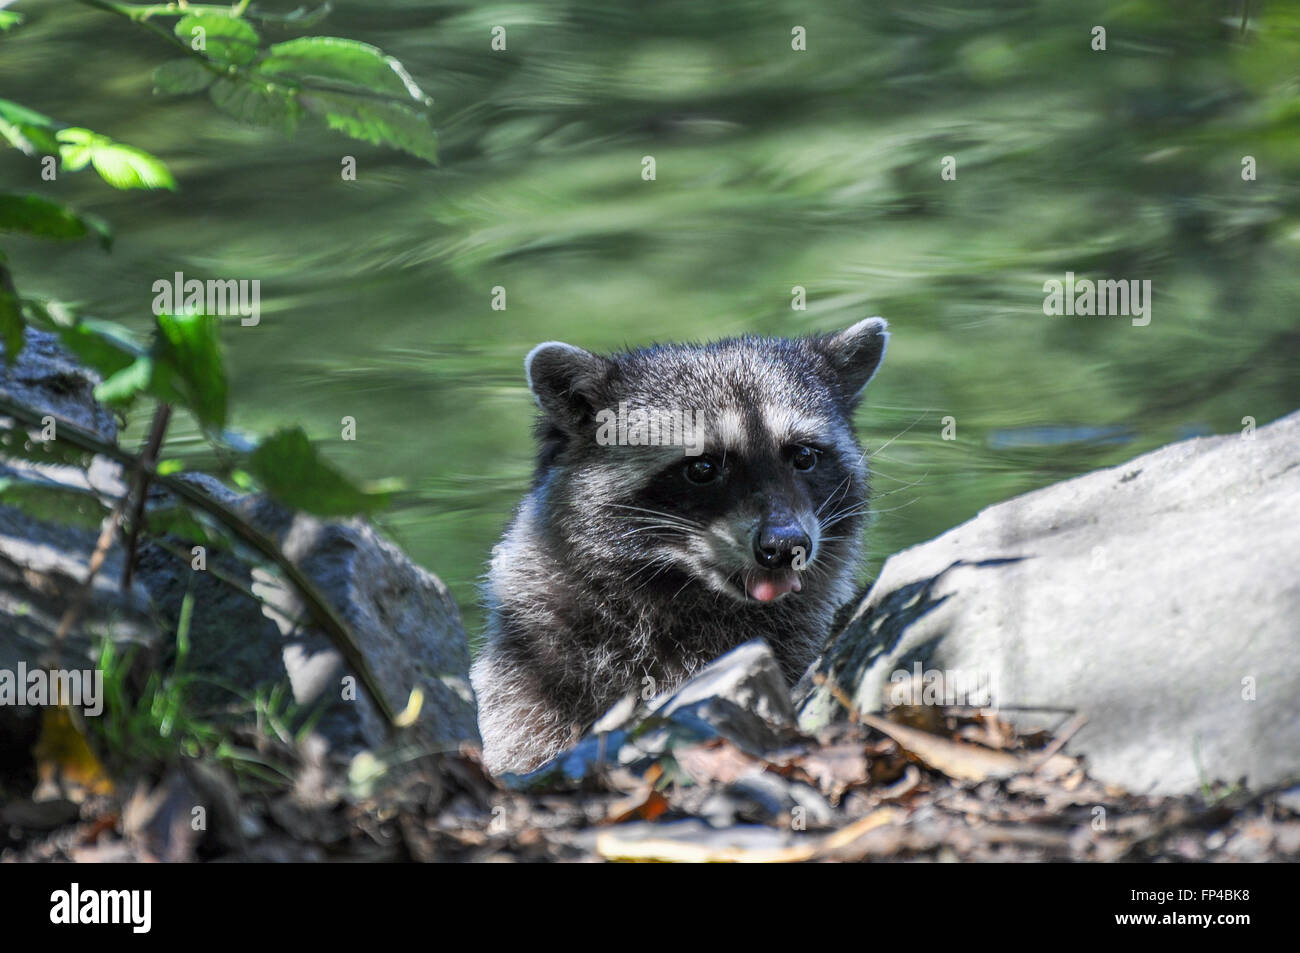 Procyon lotor: Raccoon baby leaping out of a lake. Stock Photo